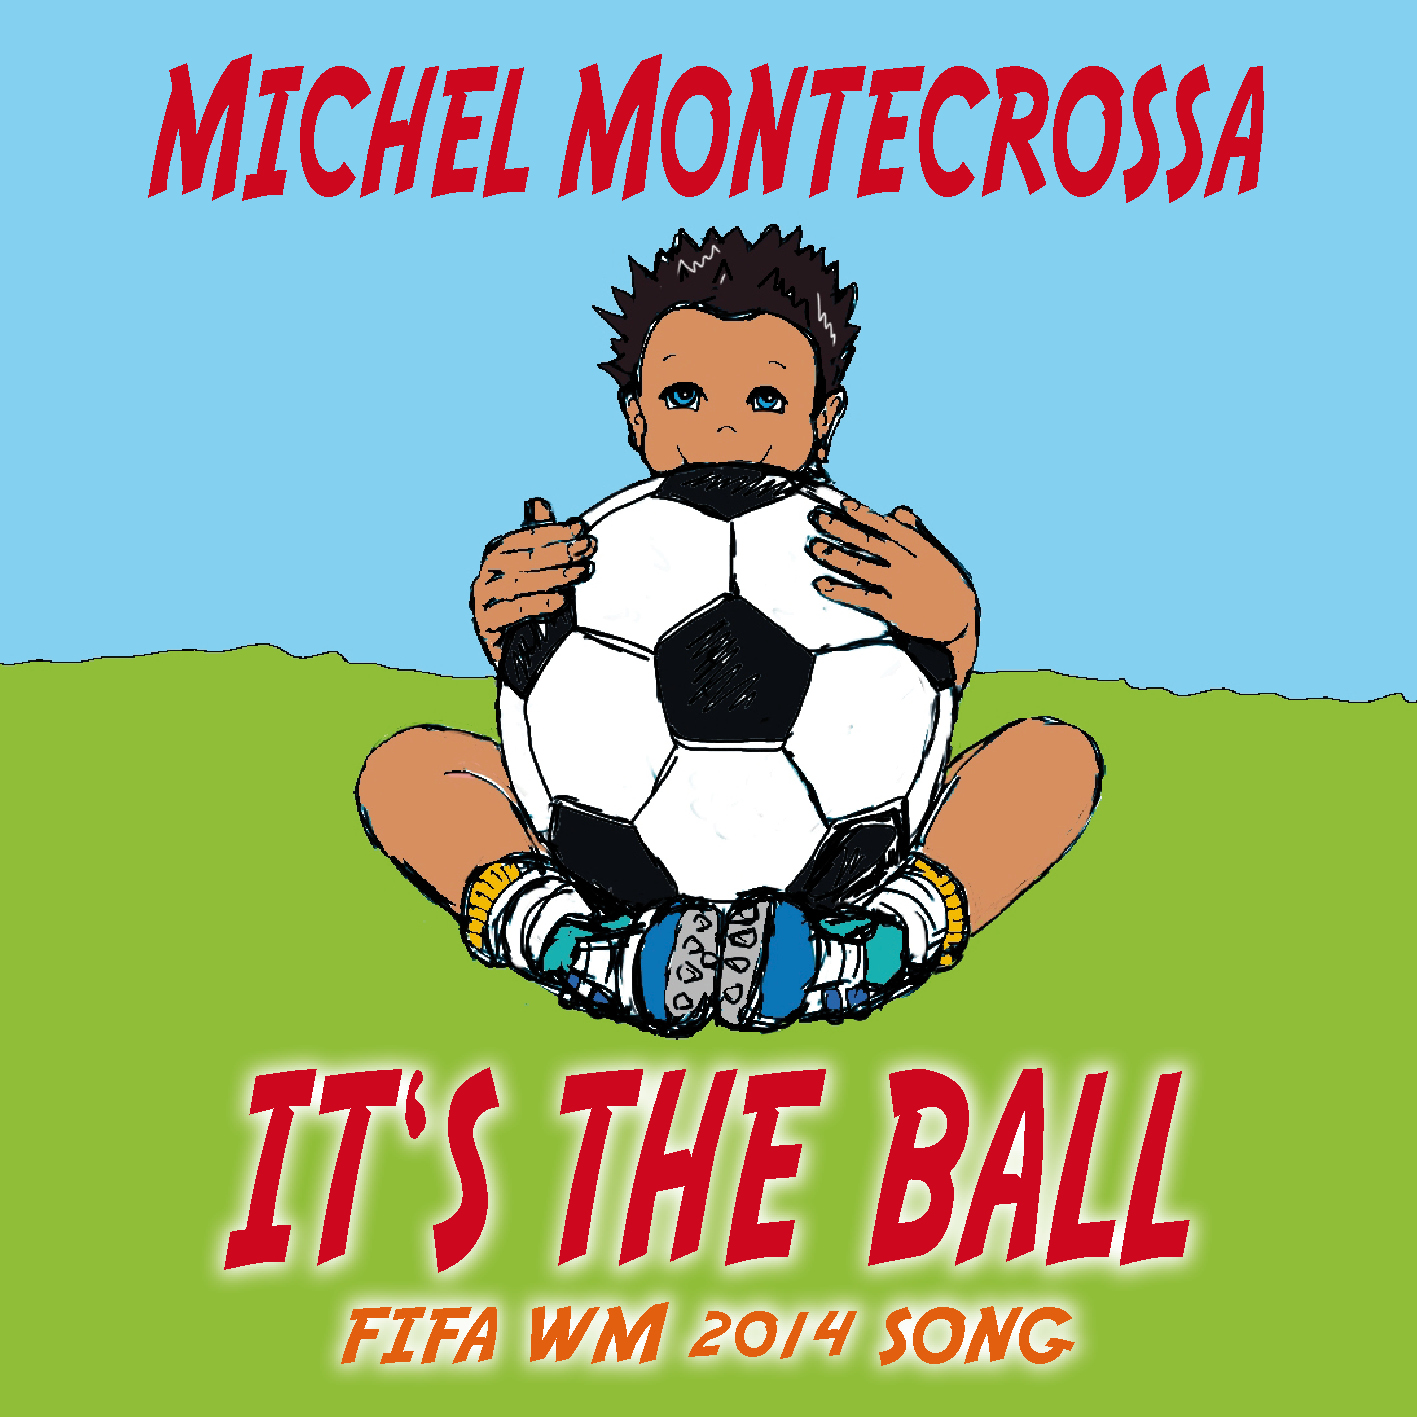 It's The Ball - Fifa WM 2014 Song